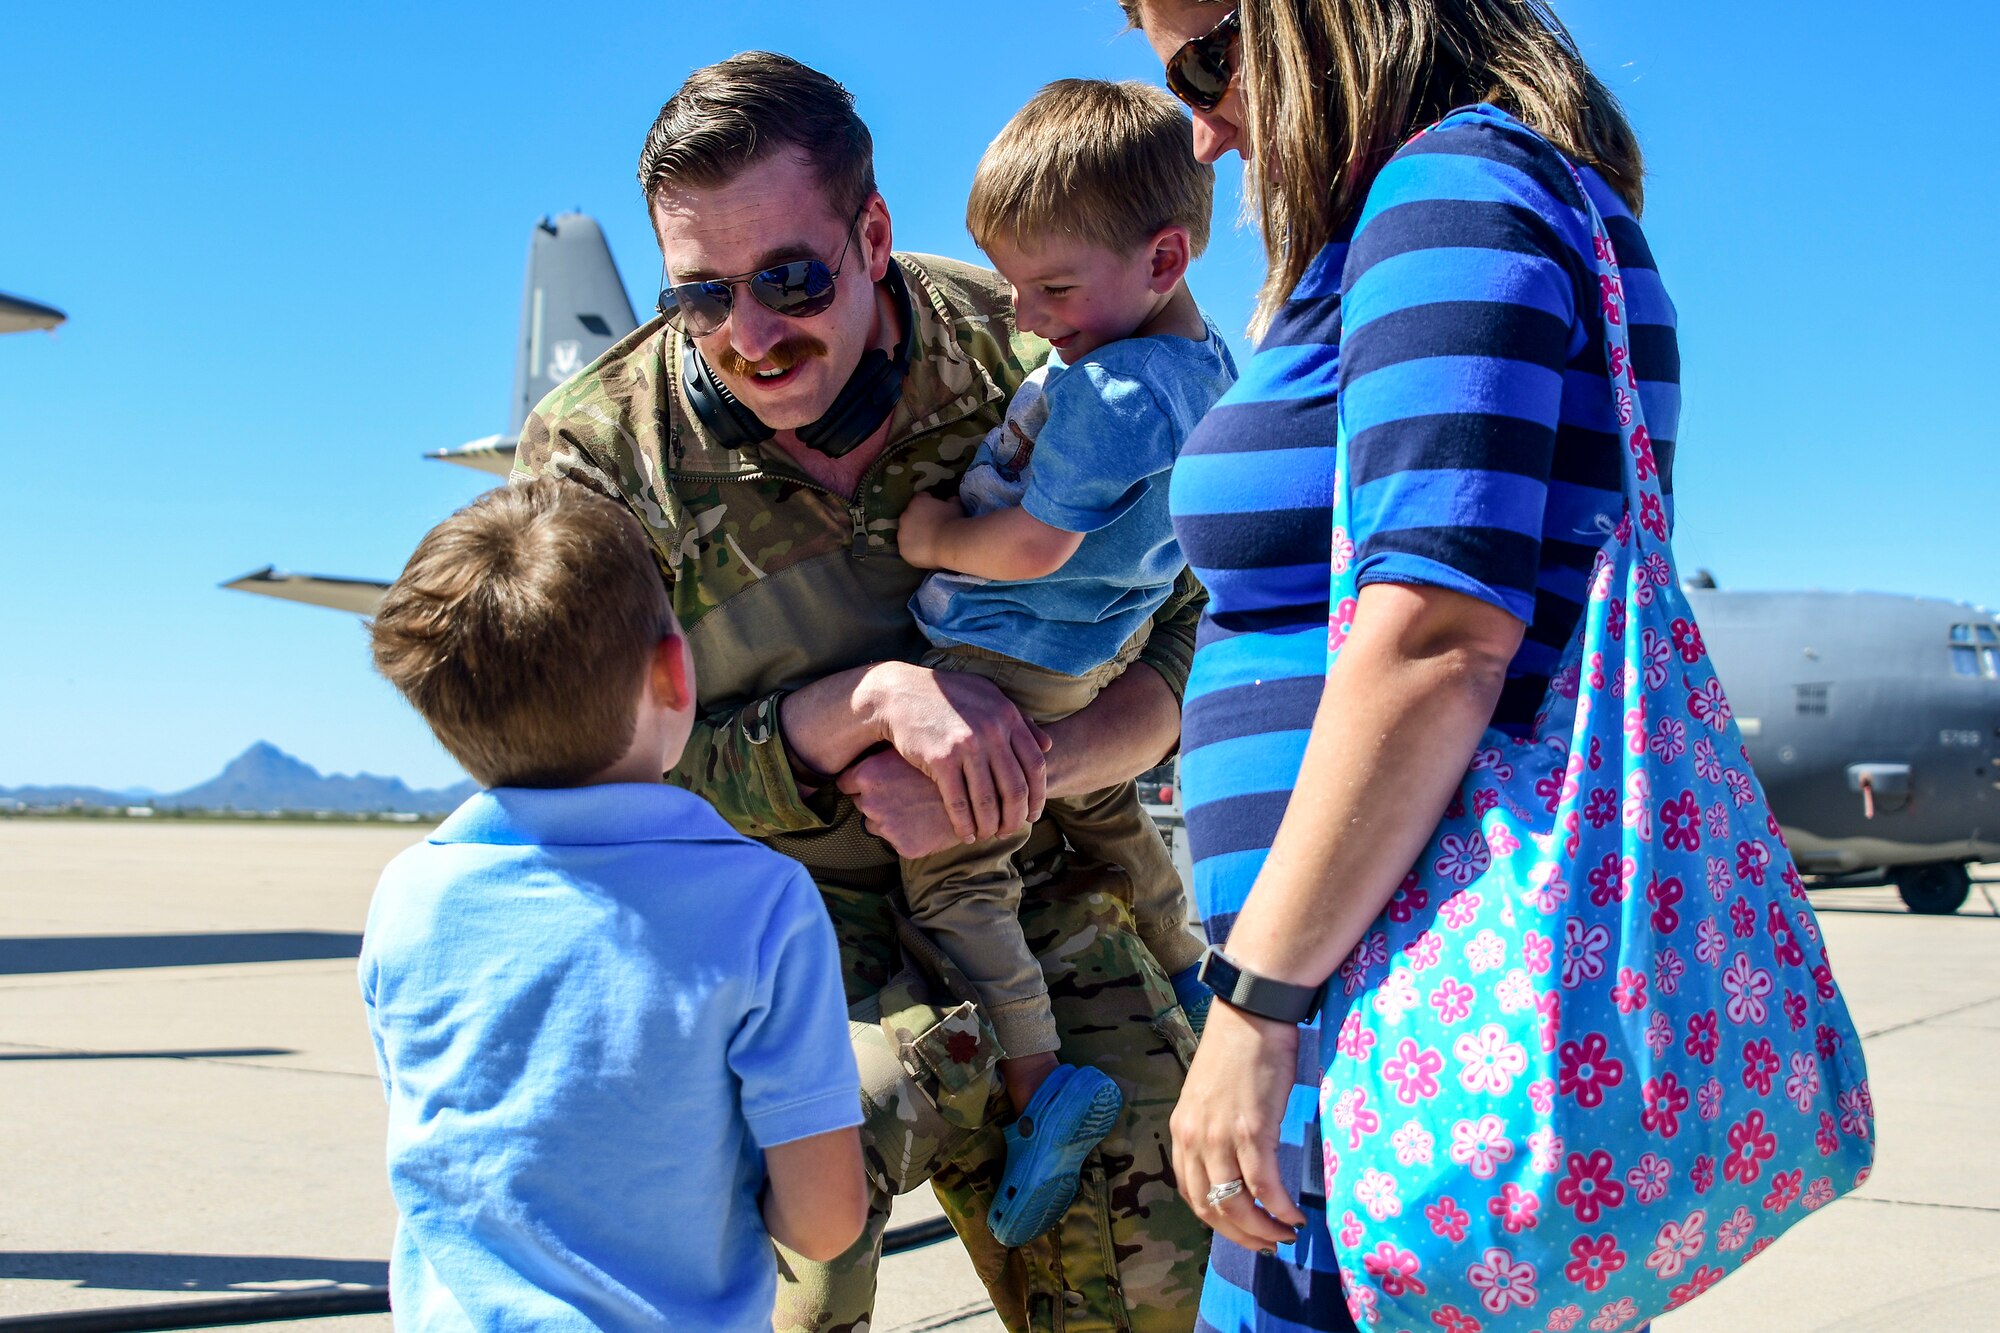 Airmen assigned to the 79th Rescue and 655th Aircraft Maintenance Squadrons are welcomed home by family and friends at Davis-Monthan Air Force Base, Arizona, Oct. 13, 2019. The Airmen were deployed supporting our mission abroad. (U.S. Air Force photo by Senior Airman Kristine Legate)